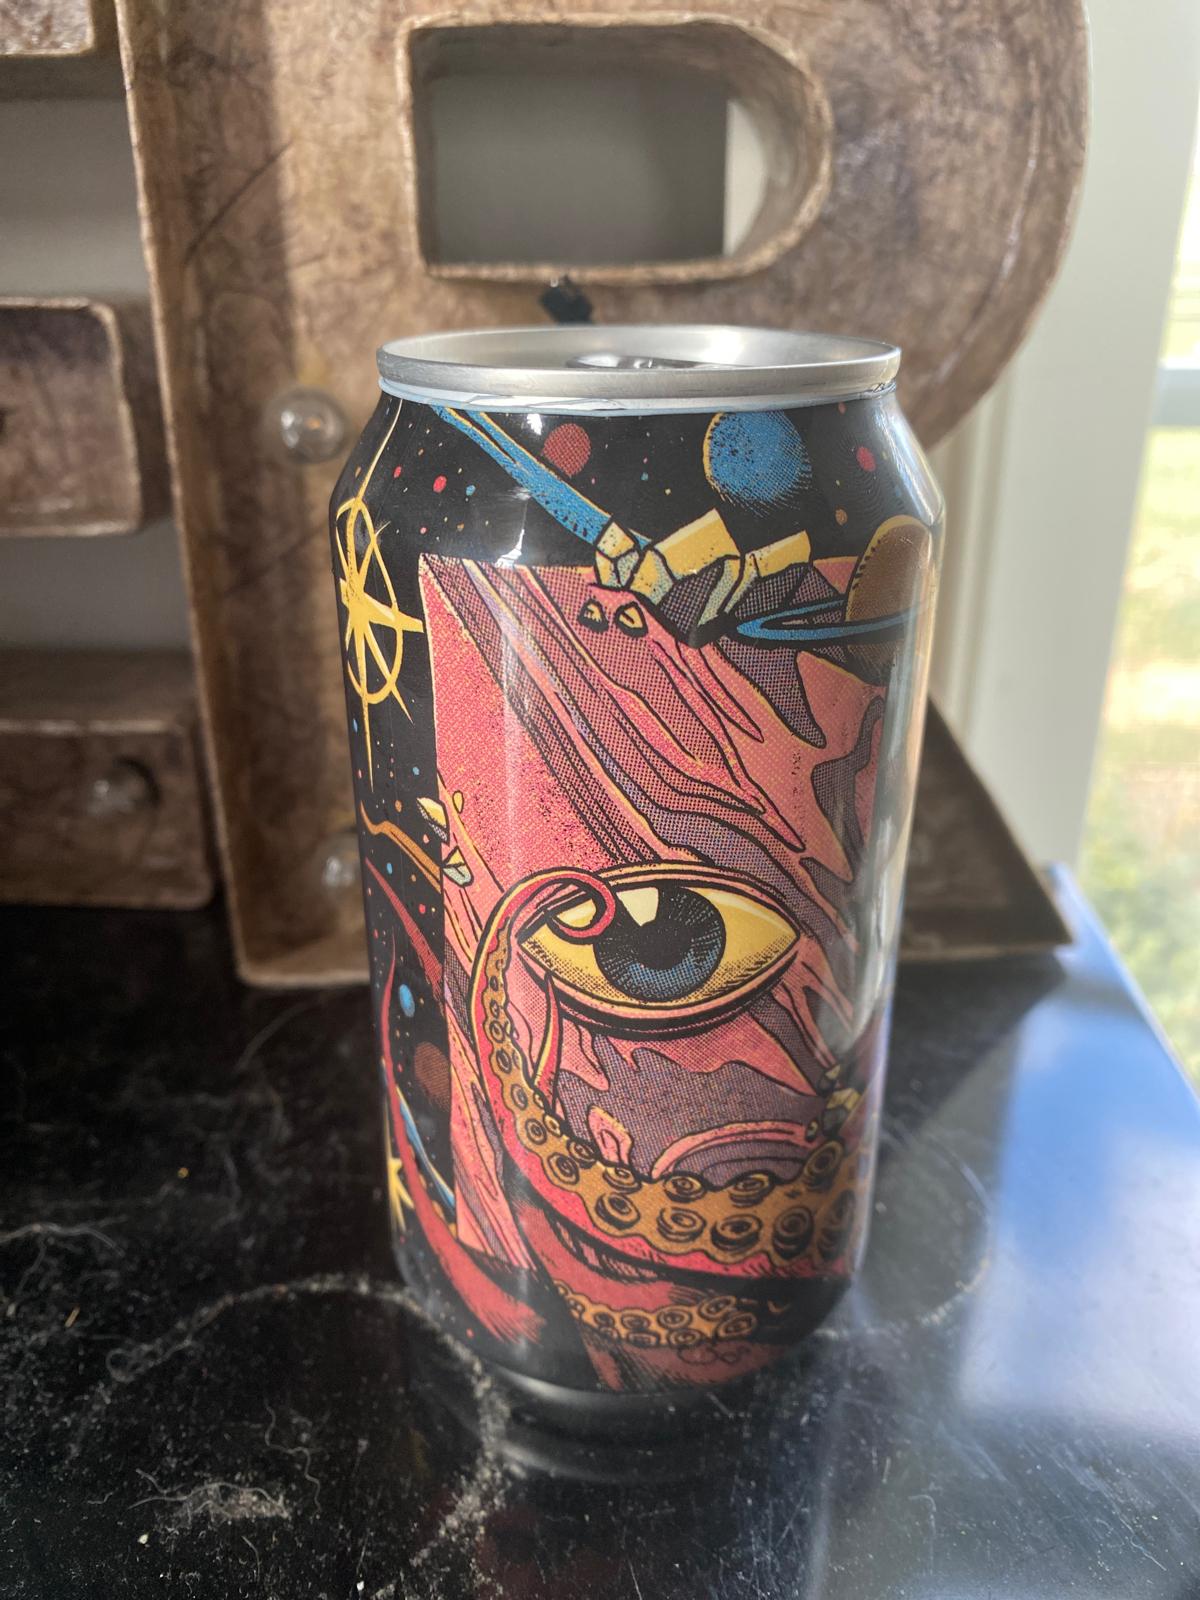 Origin of Darkness (Collaboration with Equilibrium Brewing)